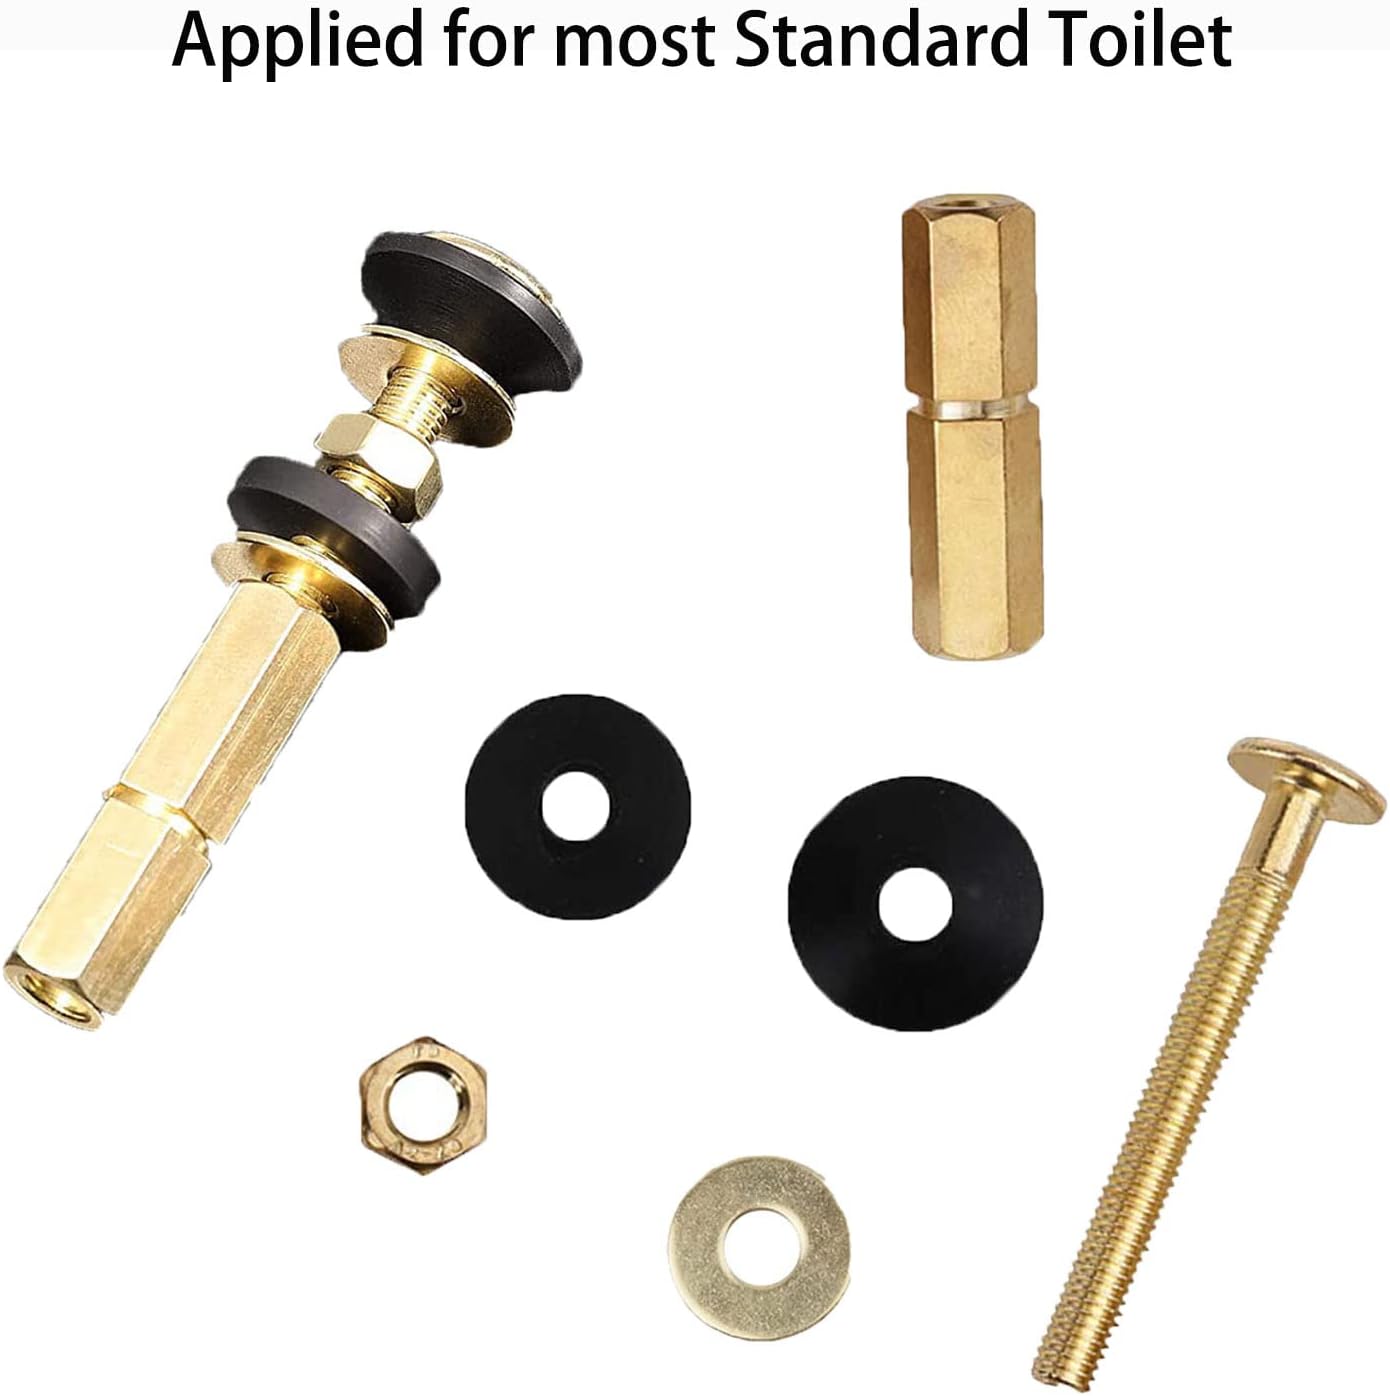 LuckyLee 2 Pack Toilet Tank to Bowl Screws with Cone Rubber Sealing Gasket, Flat Gasket and Extra Long Lock Nuts for Toilet Tank Bolts a